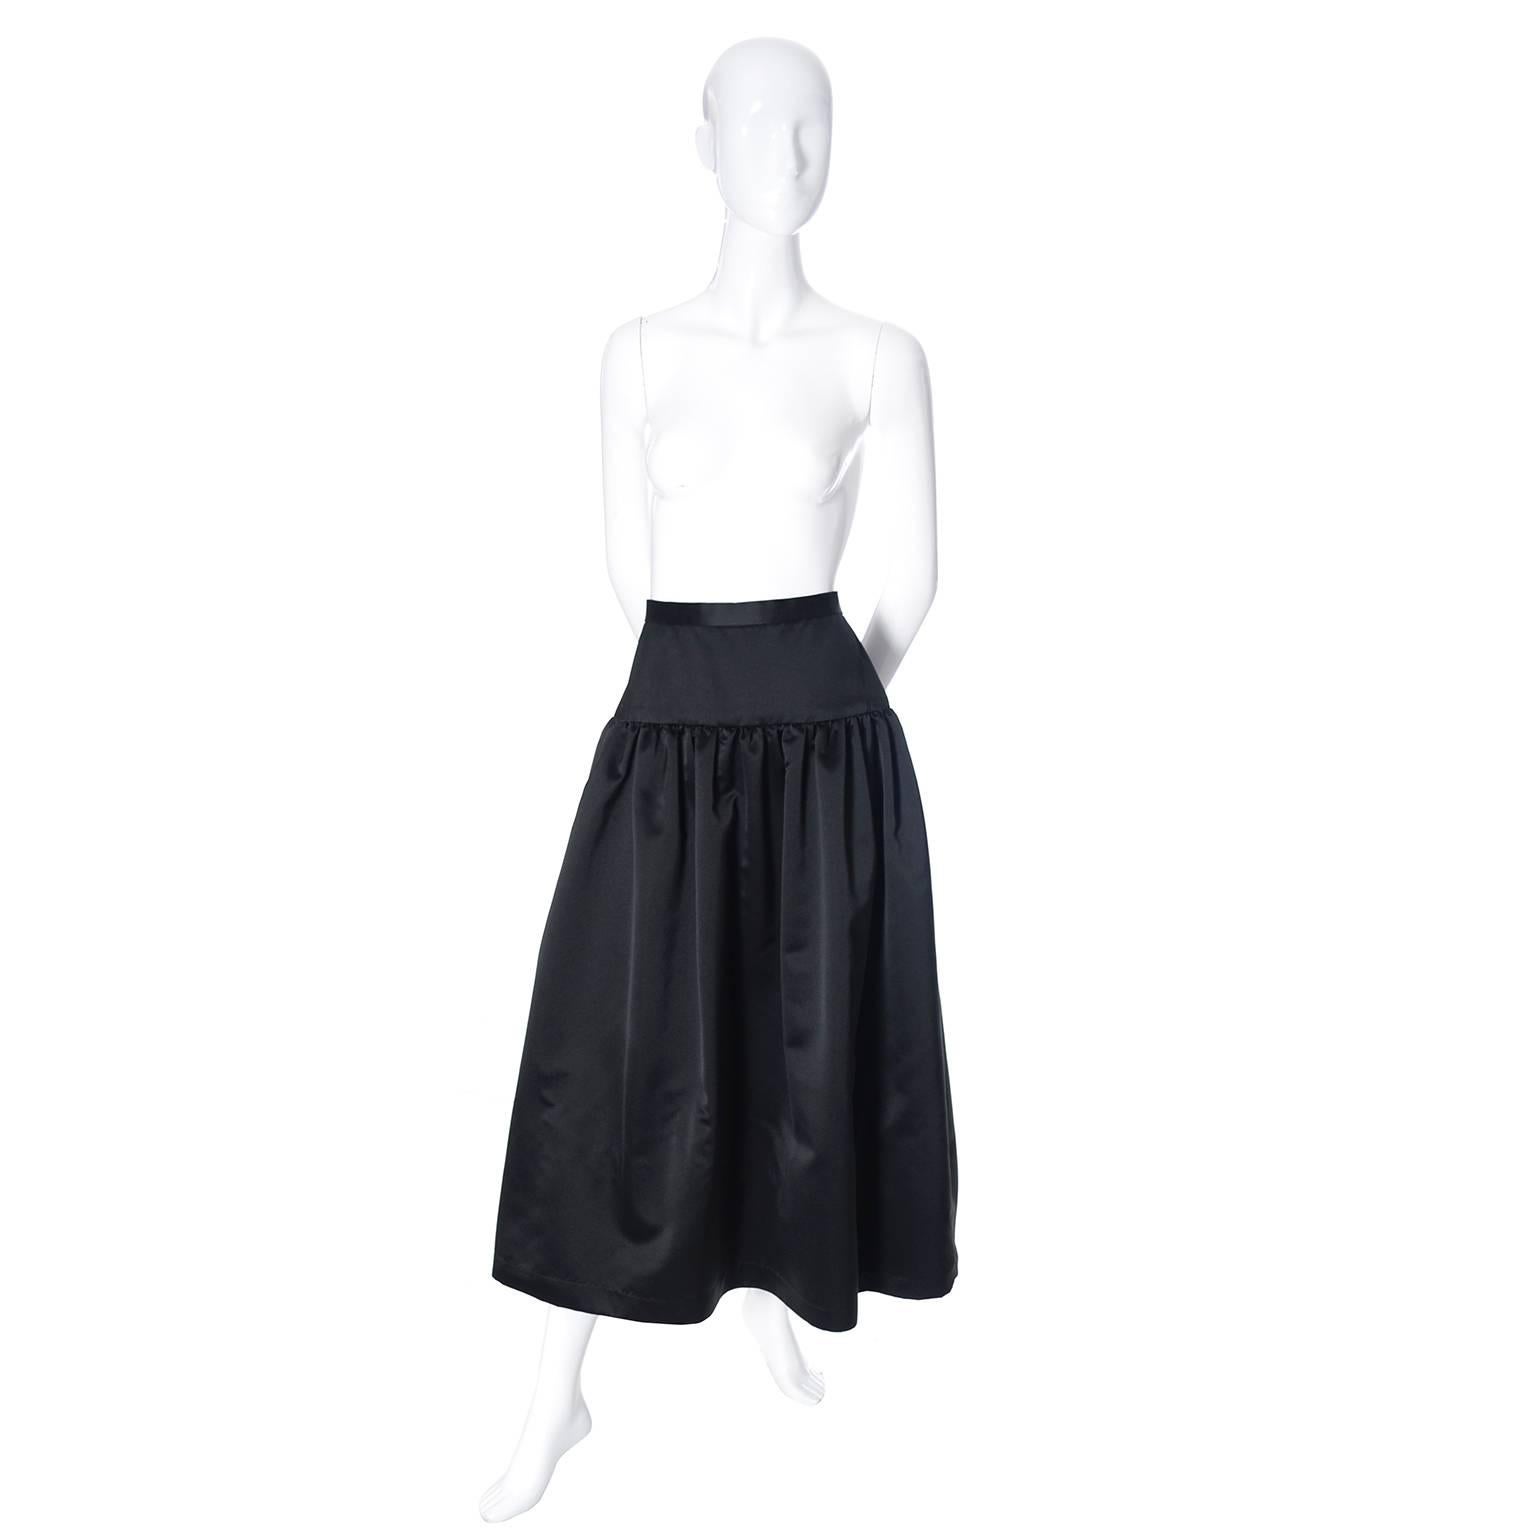 This is a pristine black satin skirt from Anthony Muto for Moroci. The skirt is labeled a size 10 but please use the measurements as the best guide to a proper fit.  The skirt has a fabulous built in under skirt with a ruffled hem that adds volume. 